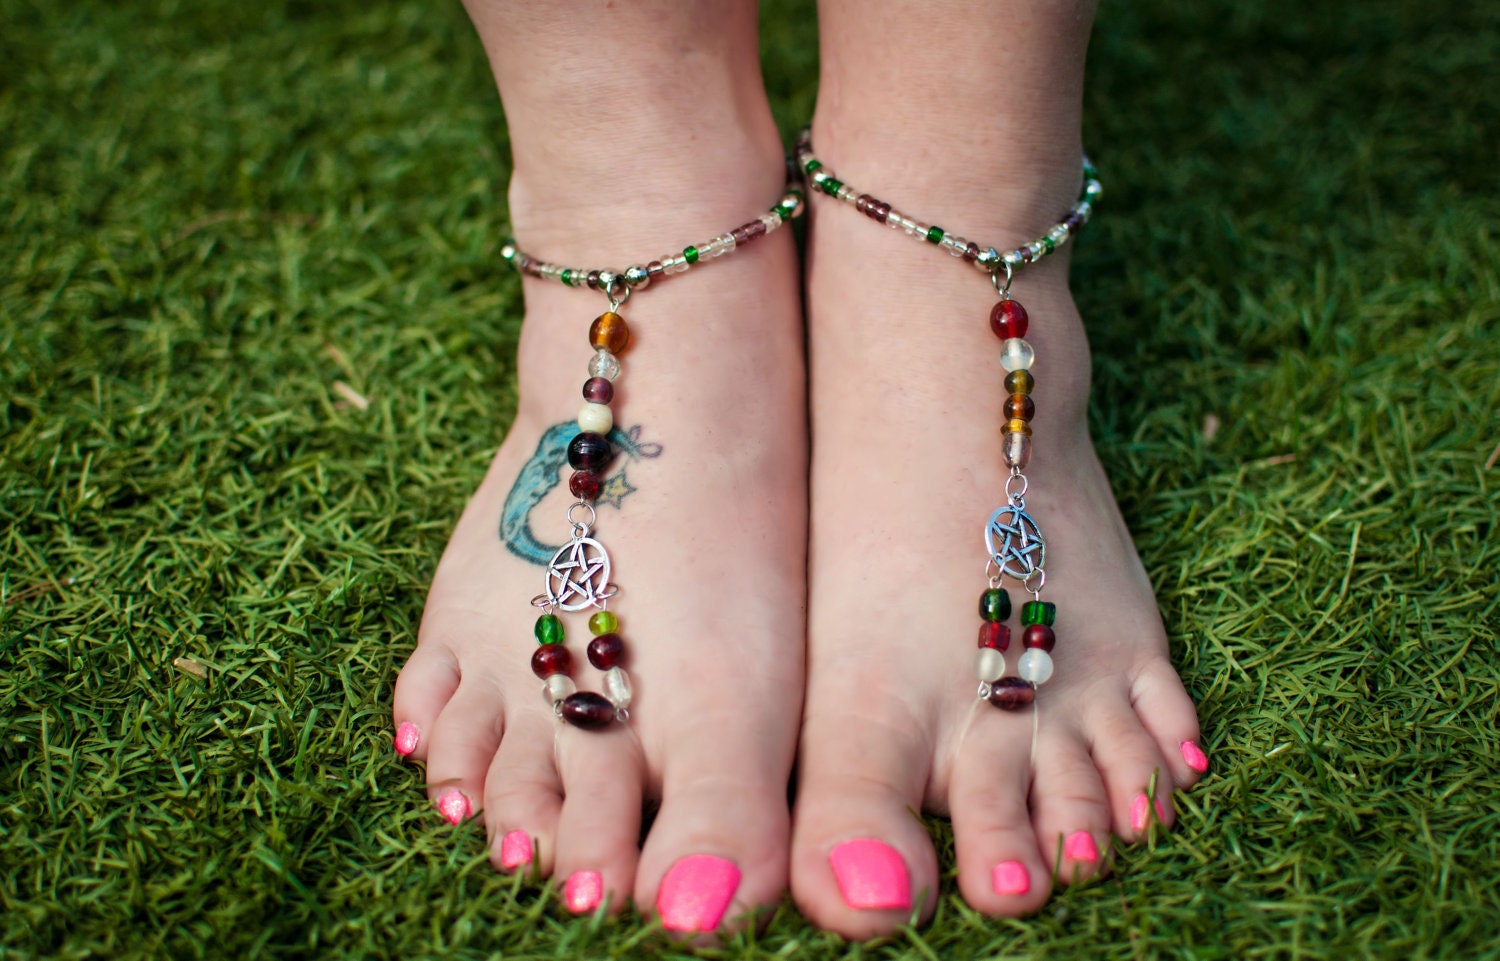 BAREFOOT SANDALS - Earth Inspired- Witchy -  Pagan Wiccan - Gypsy Belly Dancer - Tribal - Indian - Hippie - Naturalist- Minimalist - Pentacl - SacredMoonEmporium